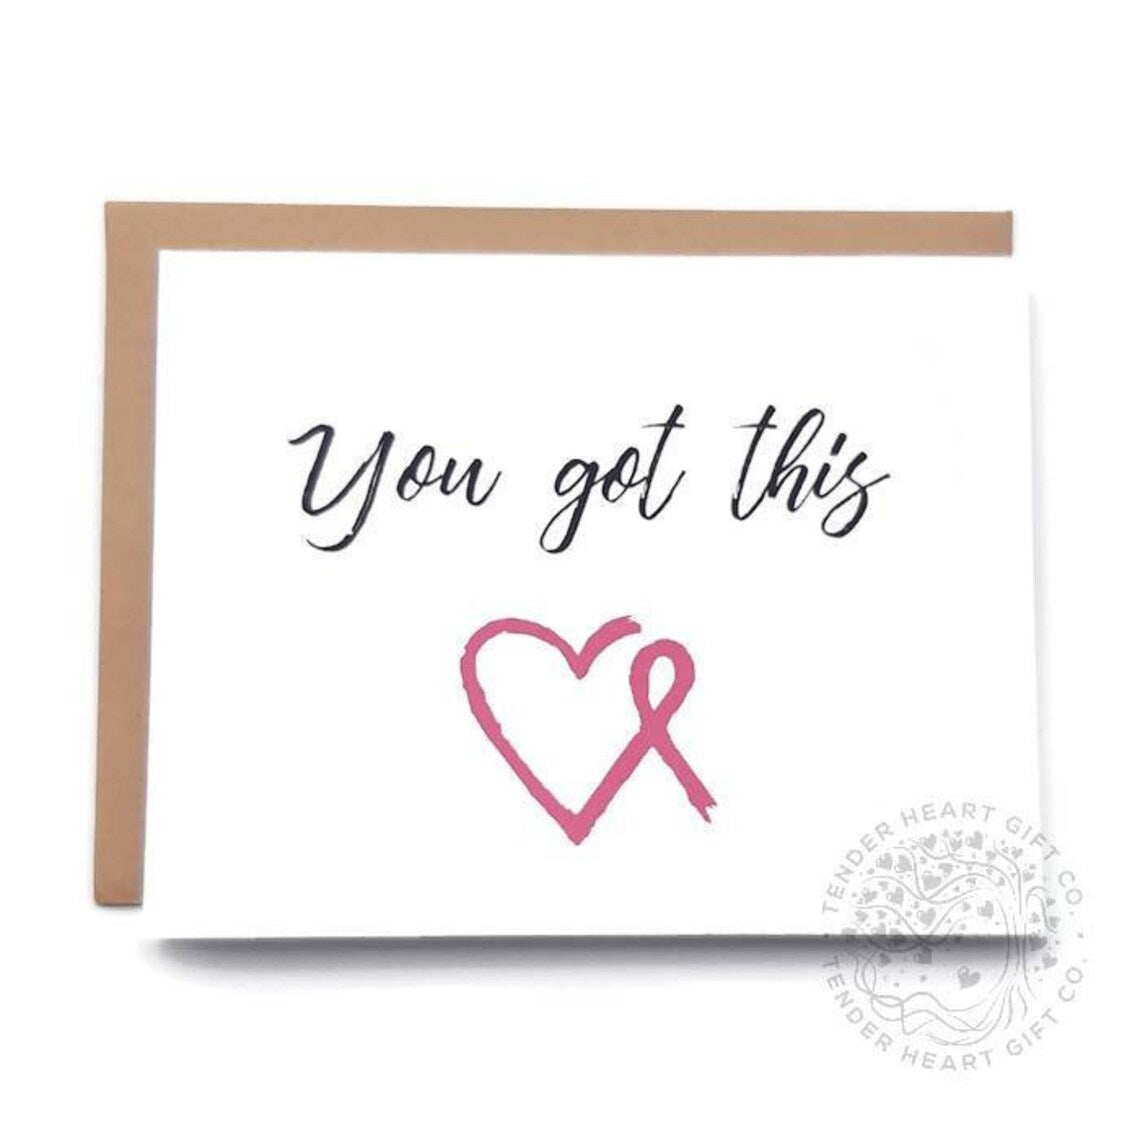 You Got This- Breast Cancer Support Card